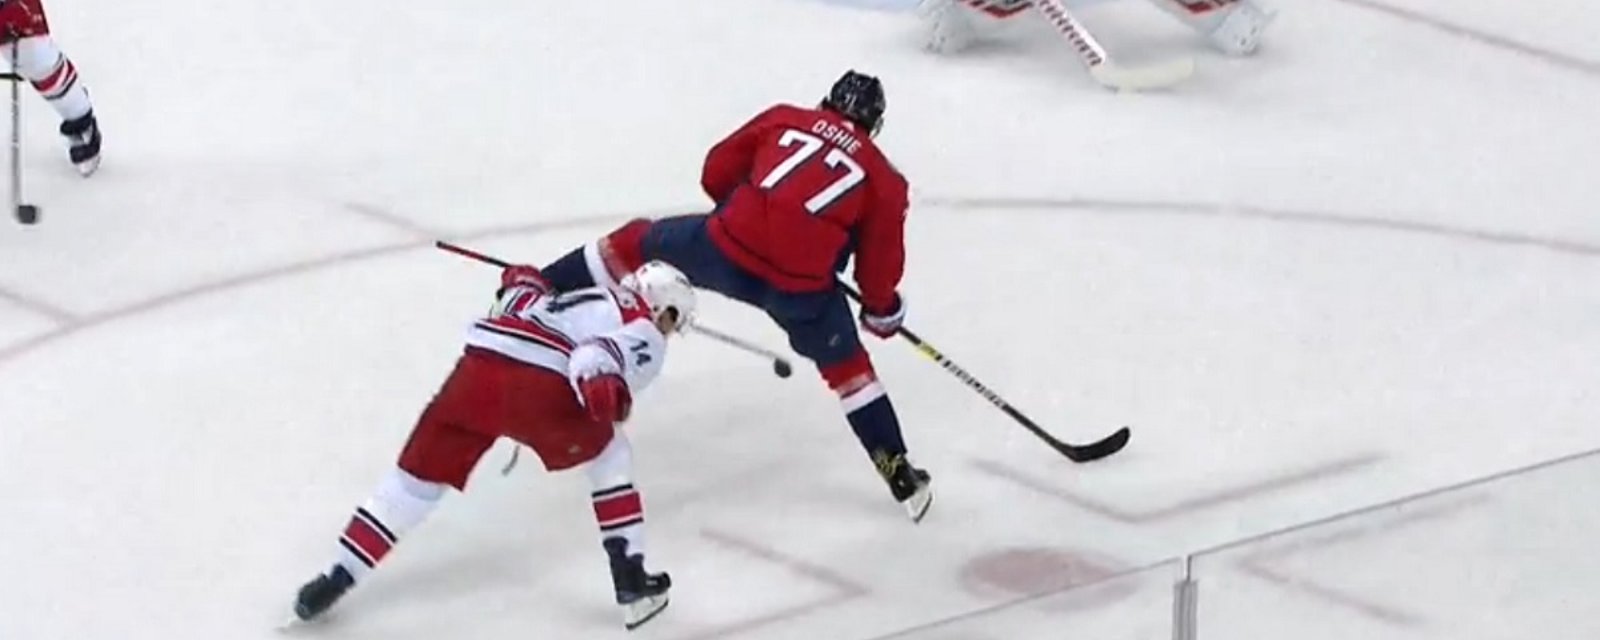 Oshie kicks Williams' stick out of his hand before scoring a beautiful goal!